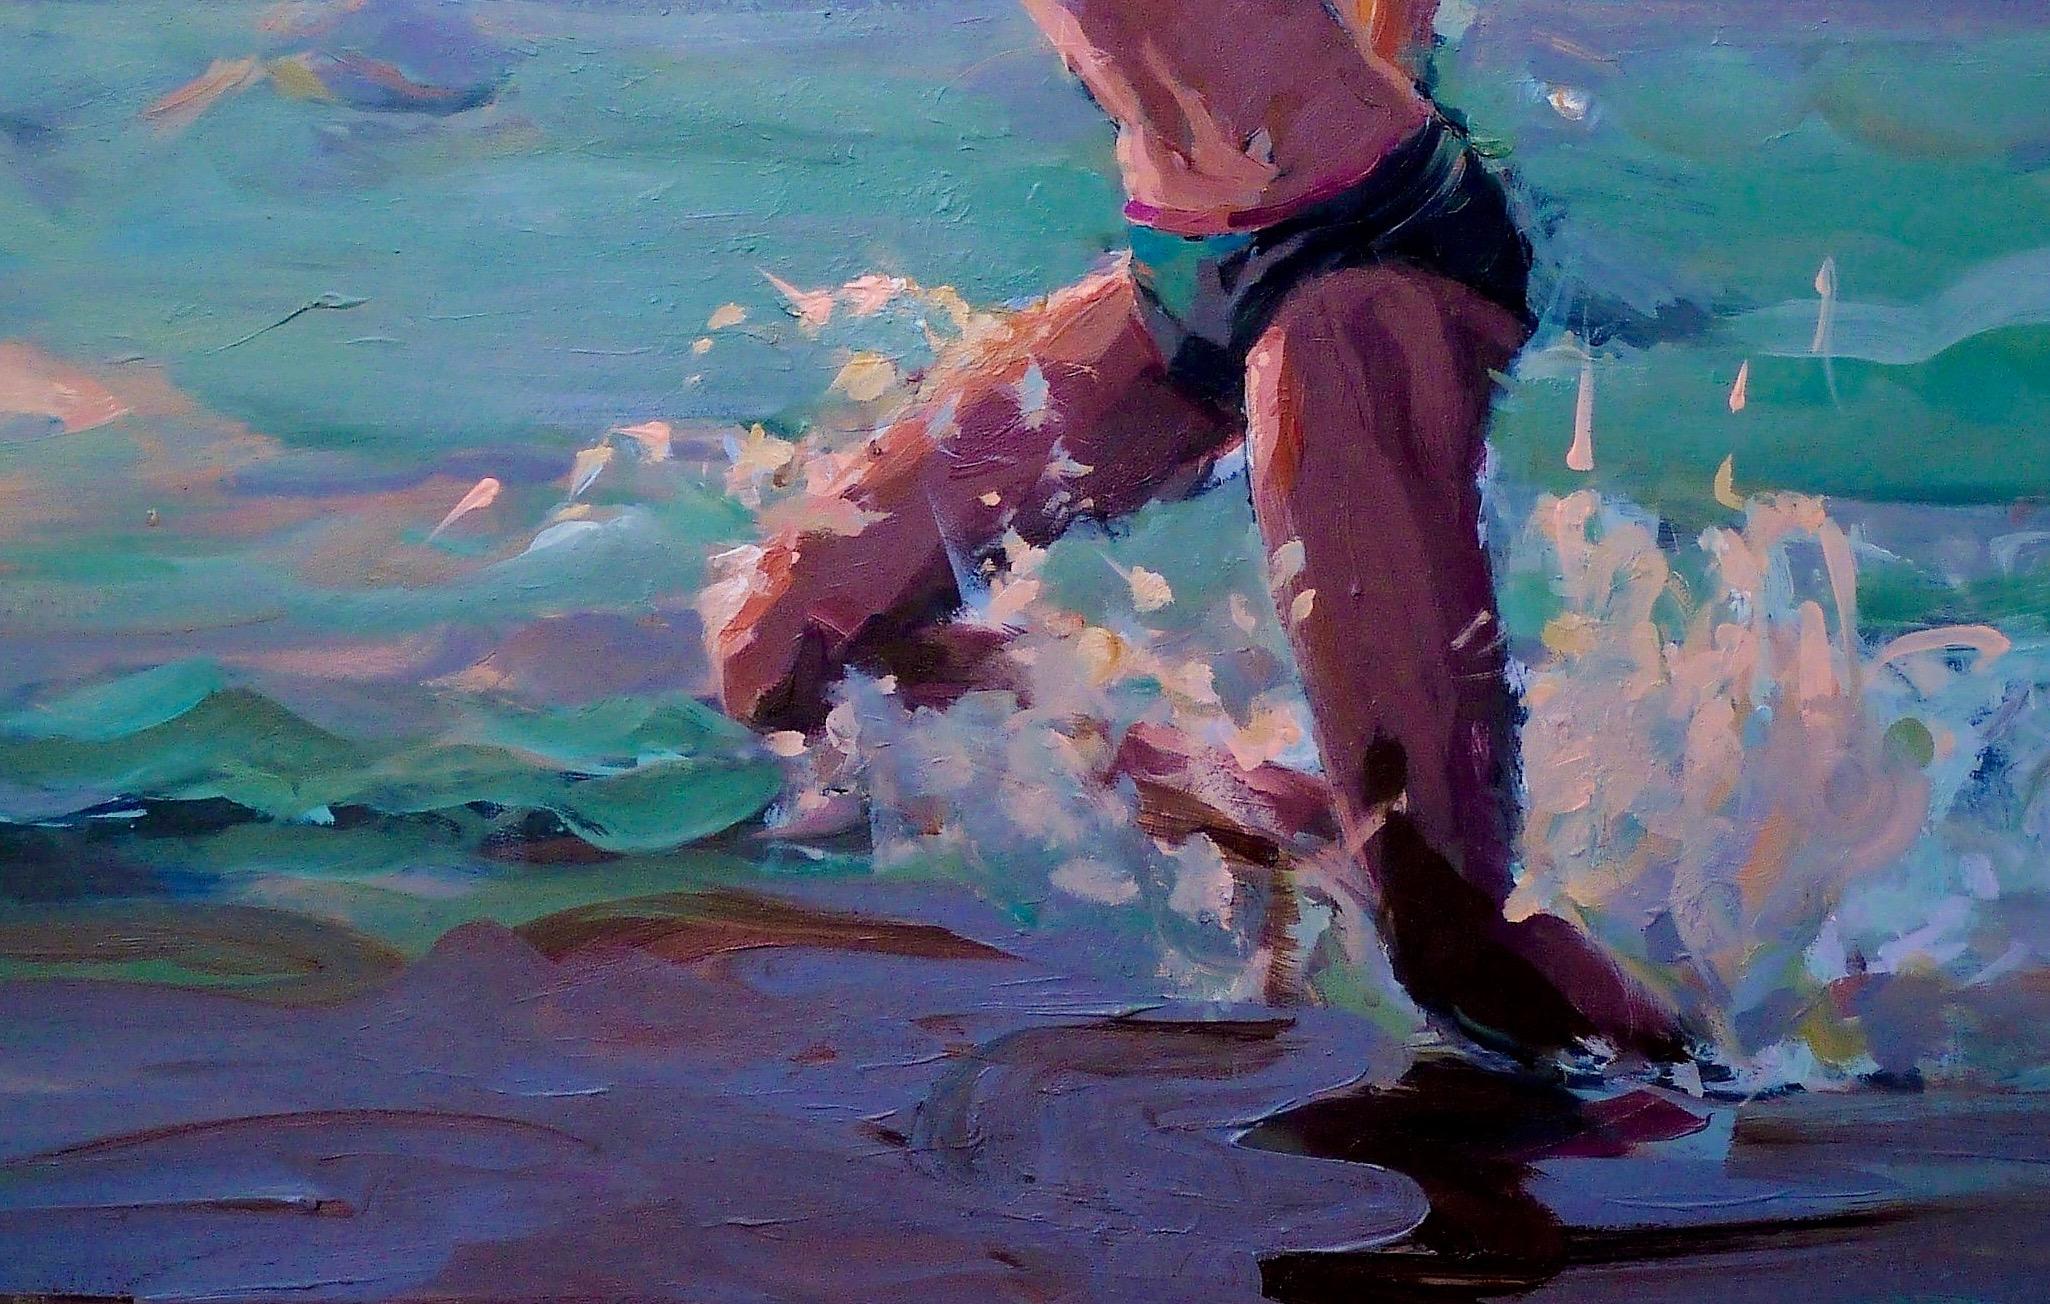 Run to the sun-21st Century Contemporary Figure Painting by Mitzy Renooy 2